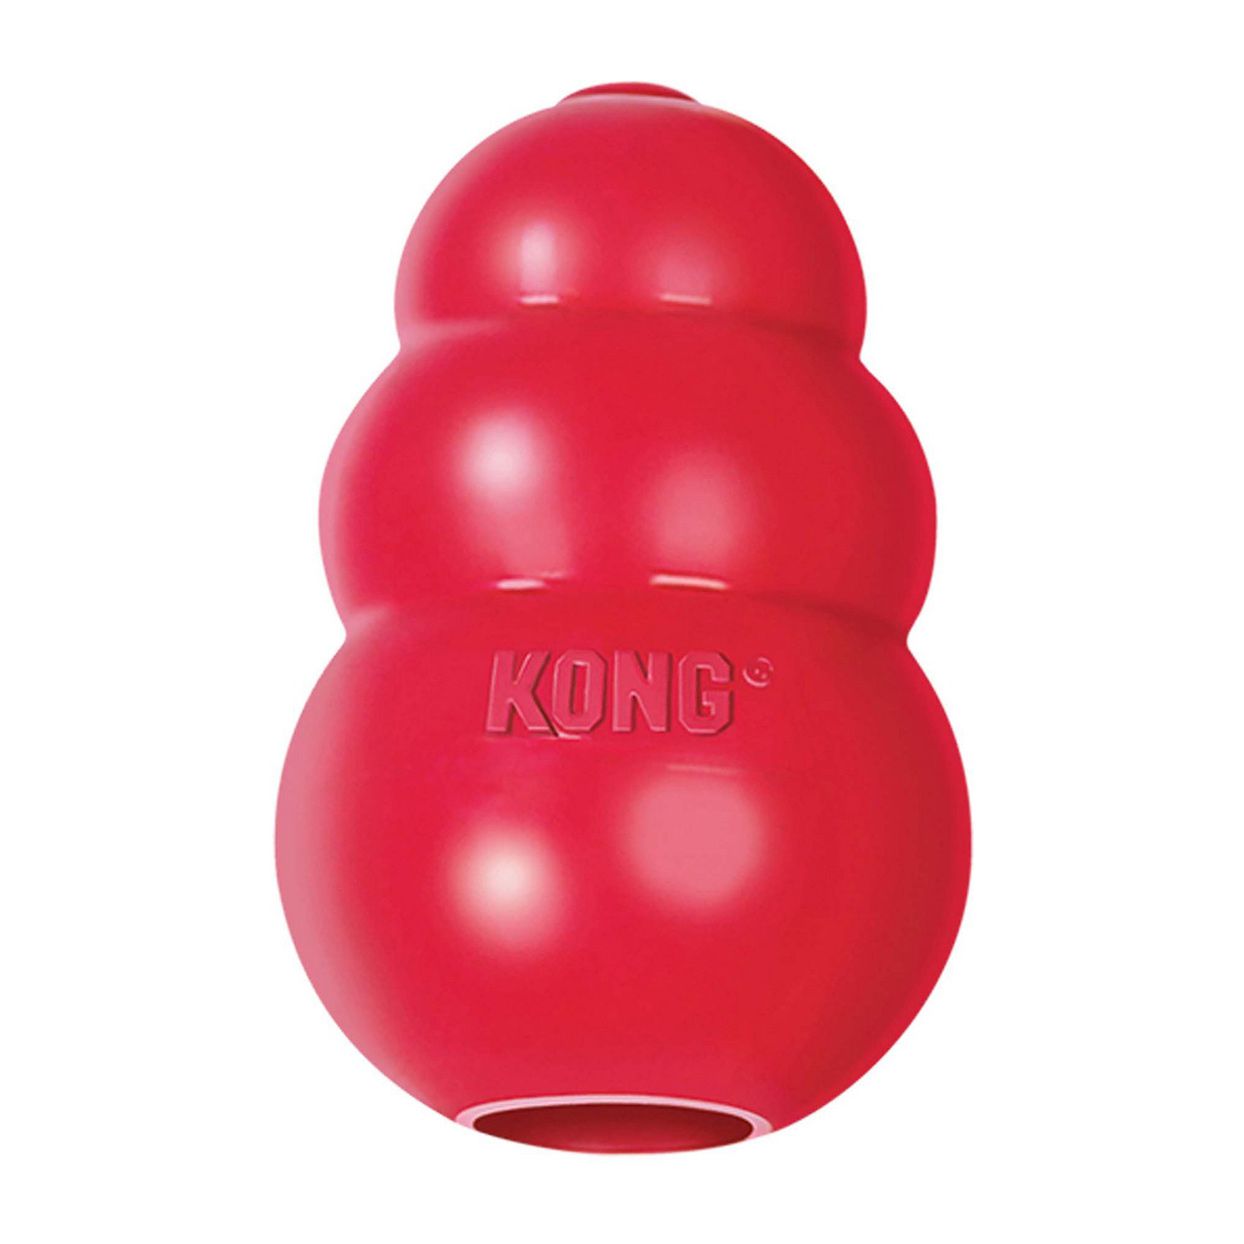 Product photo of a red KONG Classic Dog Toy on a white background